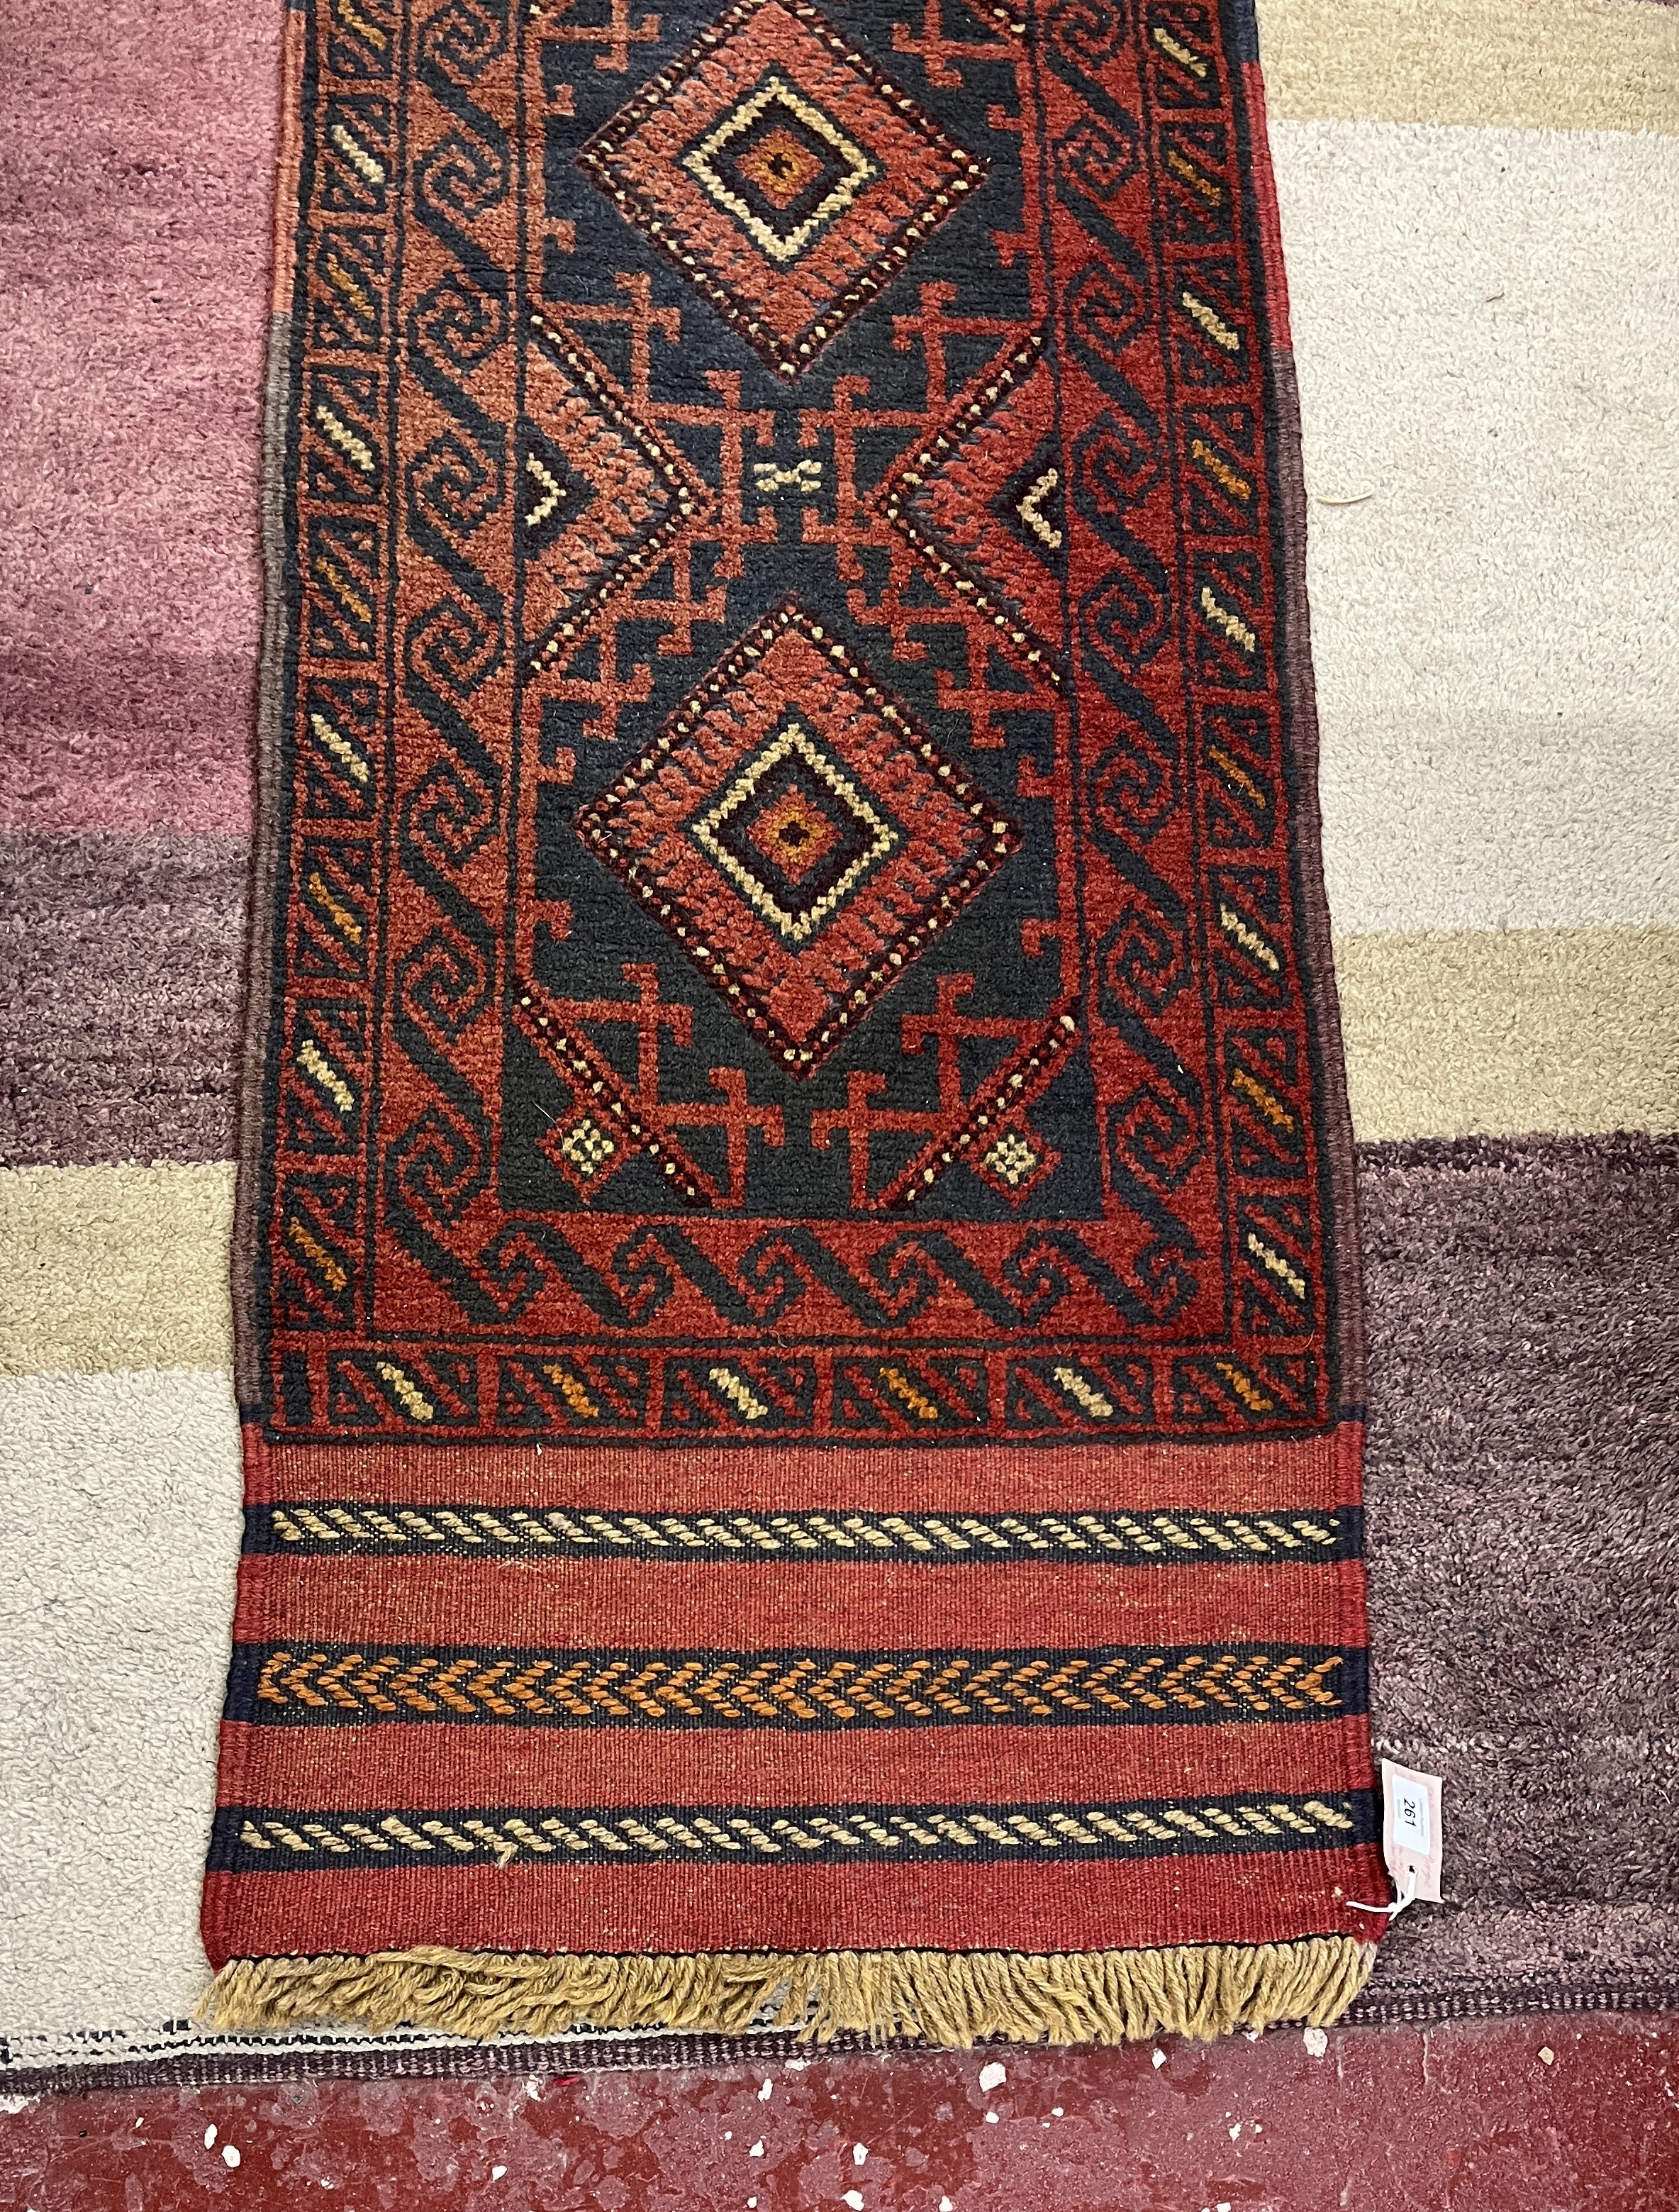 Afghan runner - Approx size: 243cm x 59cm - Image 2 of 5